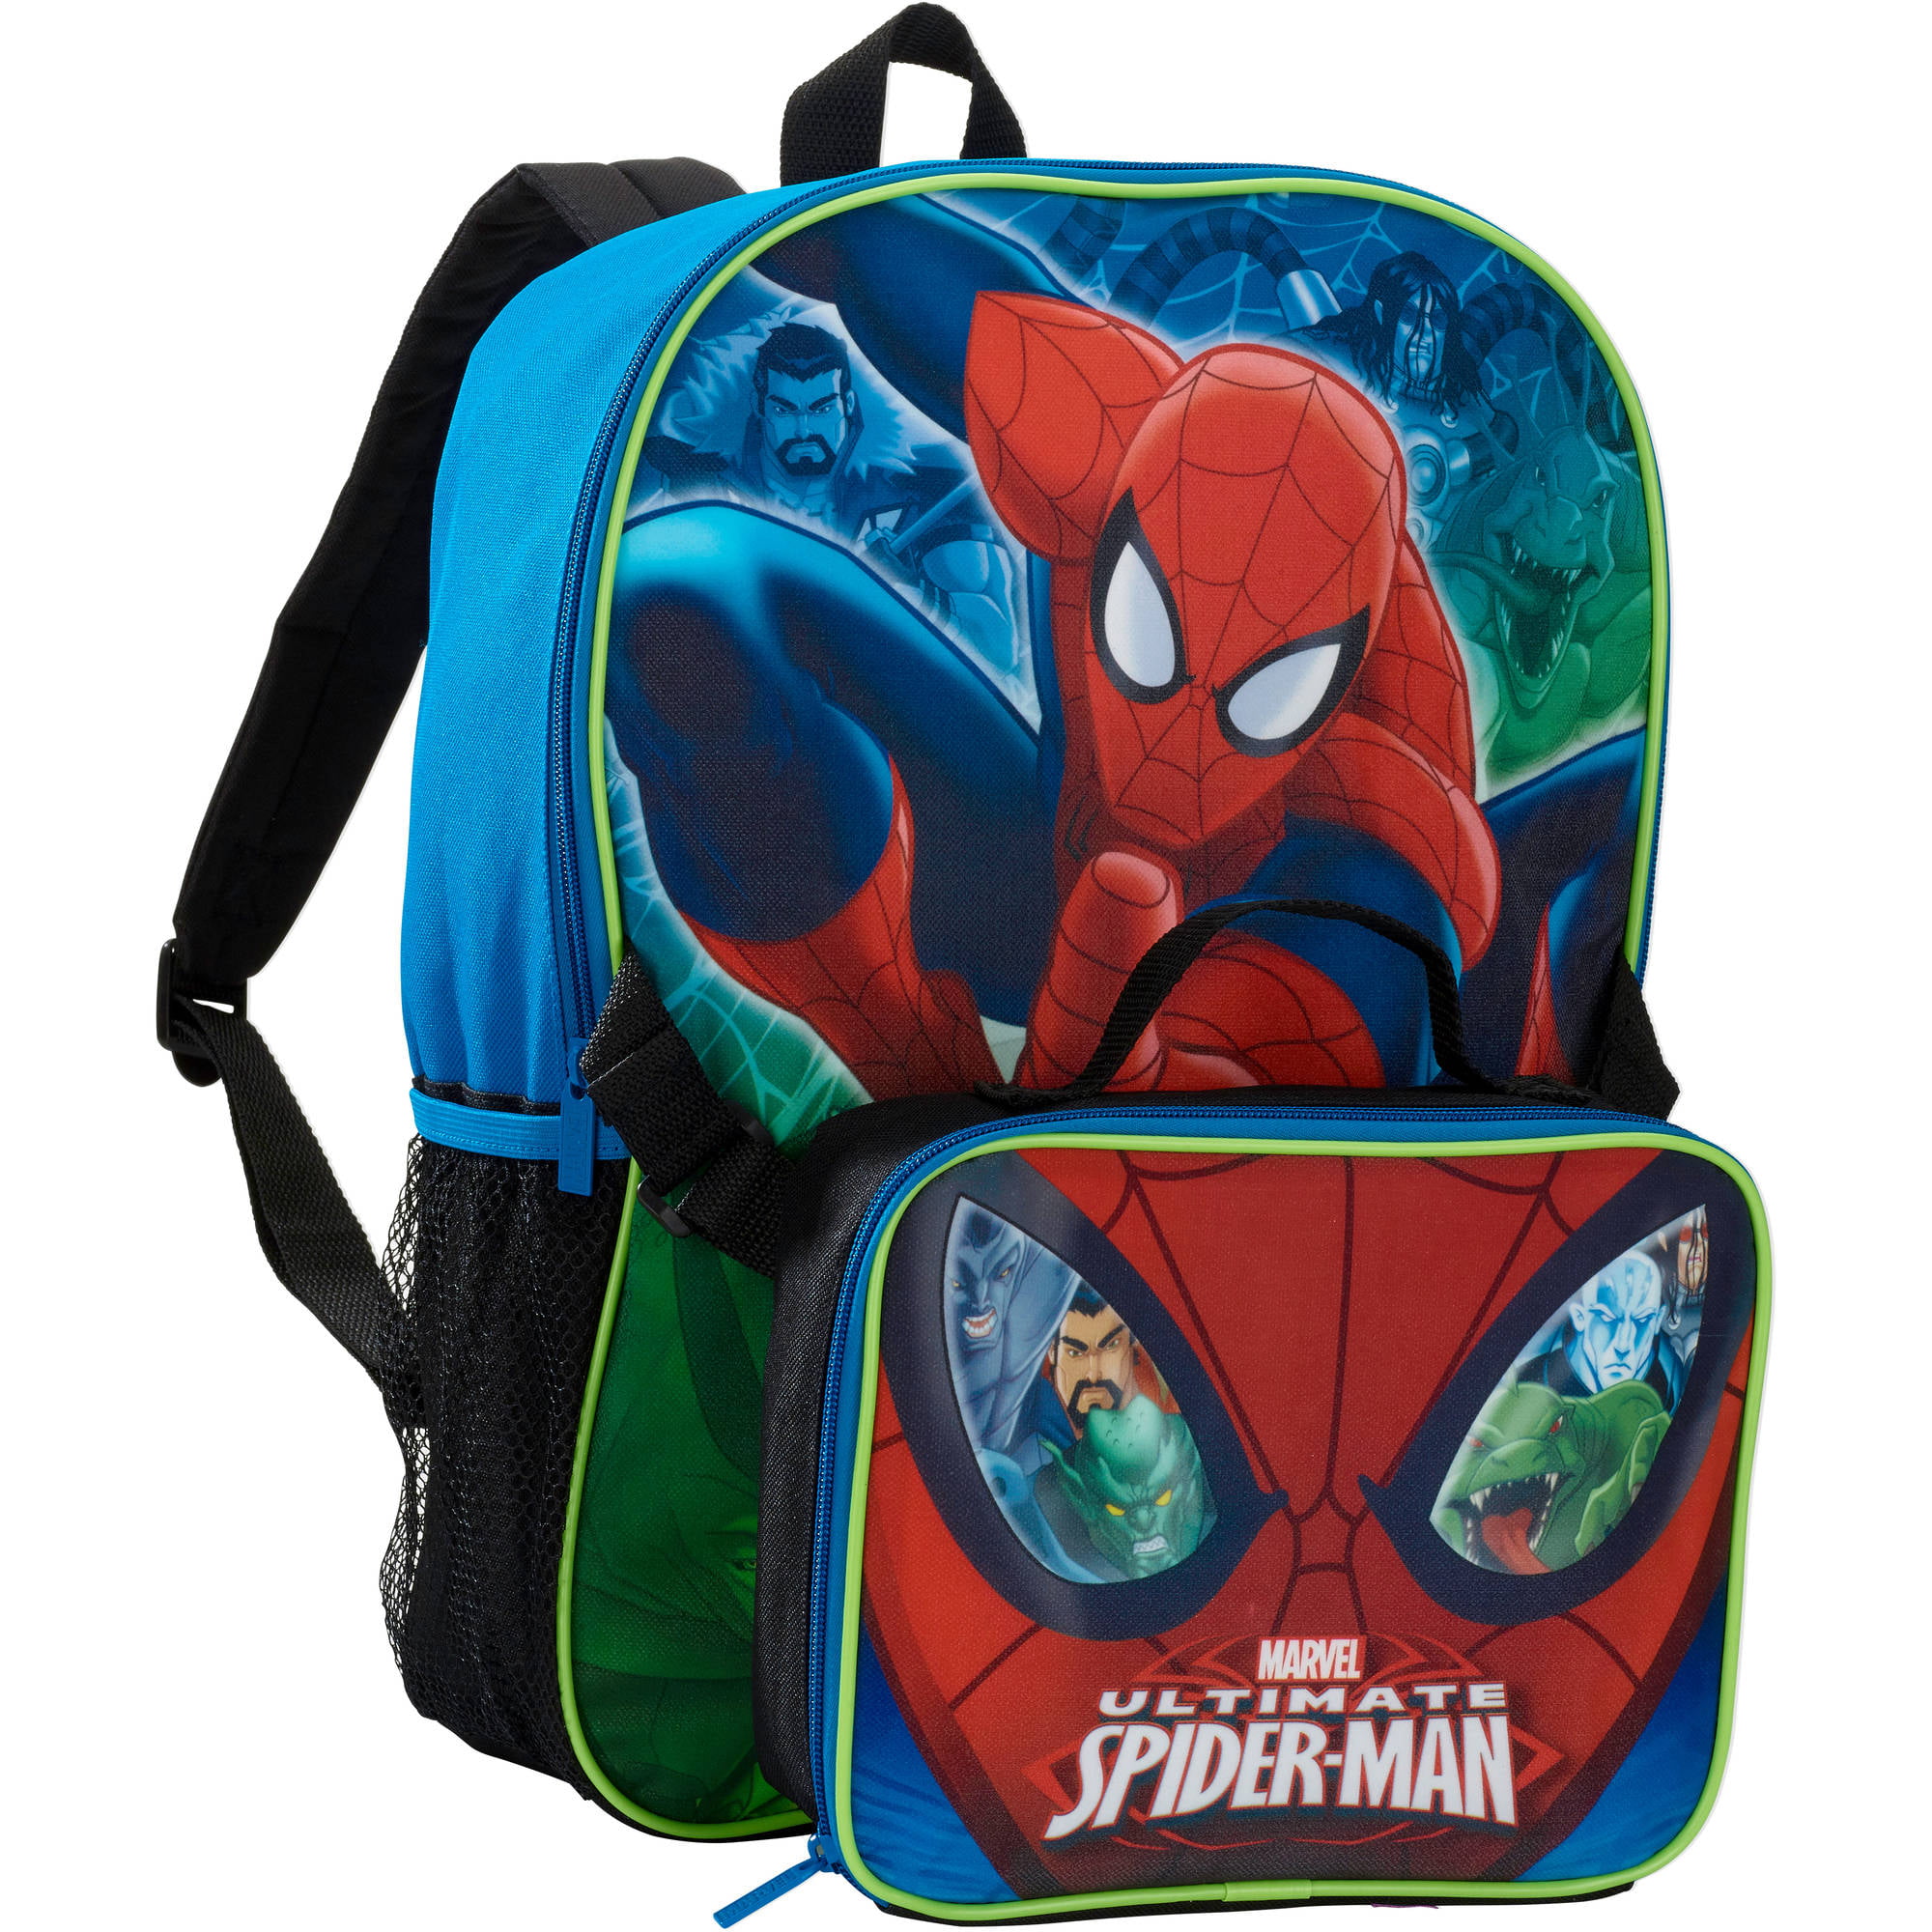 Spider-Man Backpack with Lunch Kit - Walmart.com